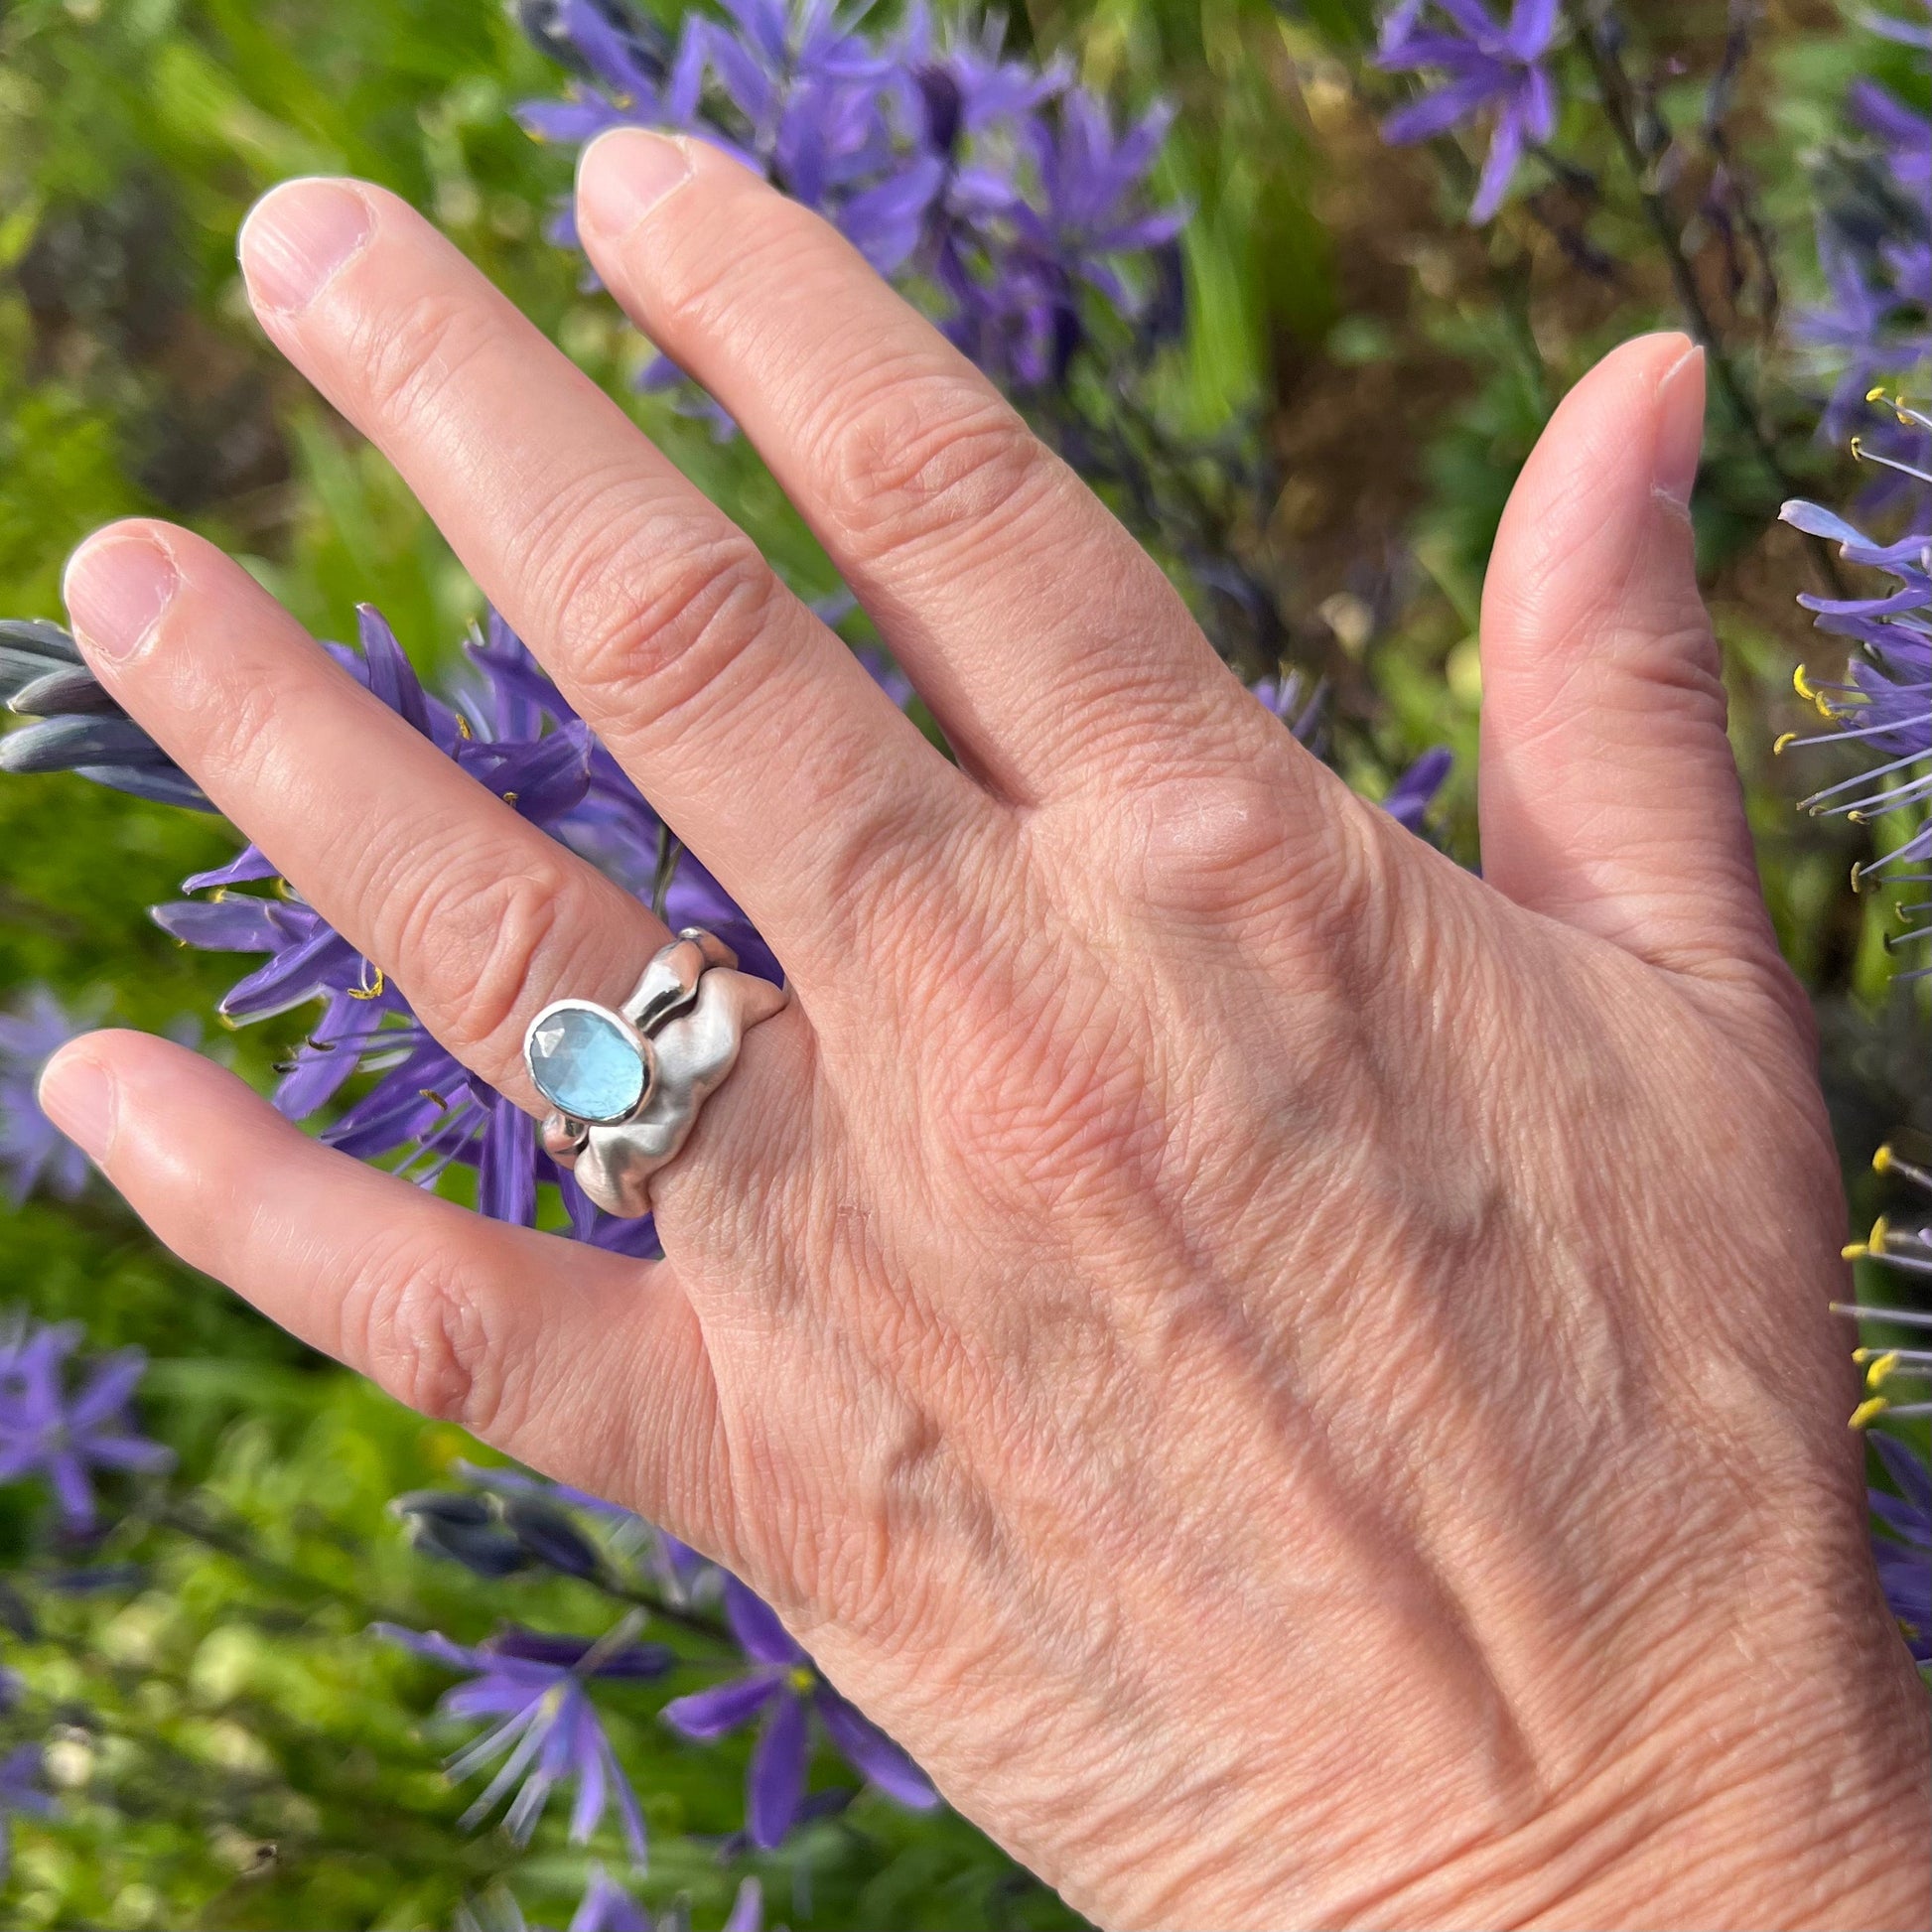 A matt wave ring and a topaz set bubble ring on a hand with a background of purple flowers.